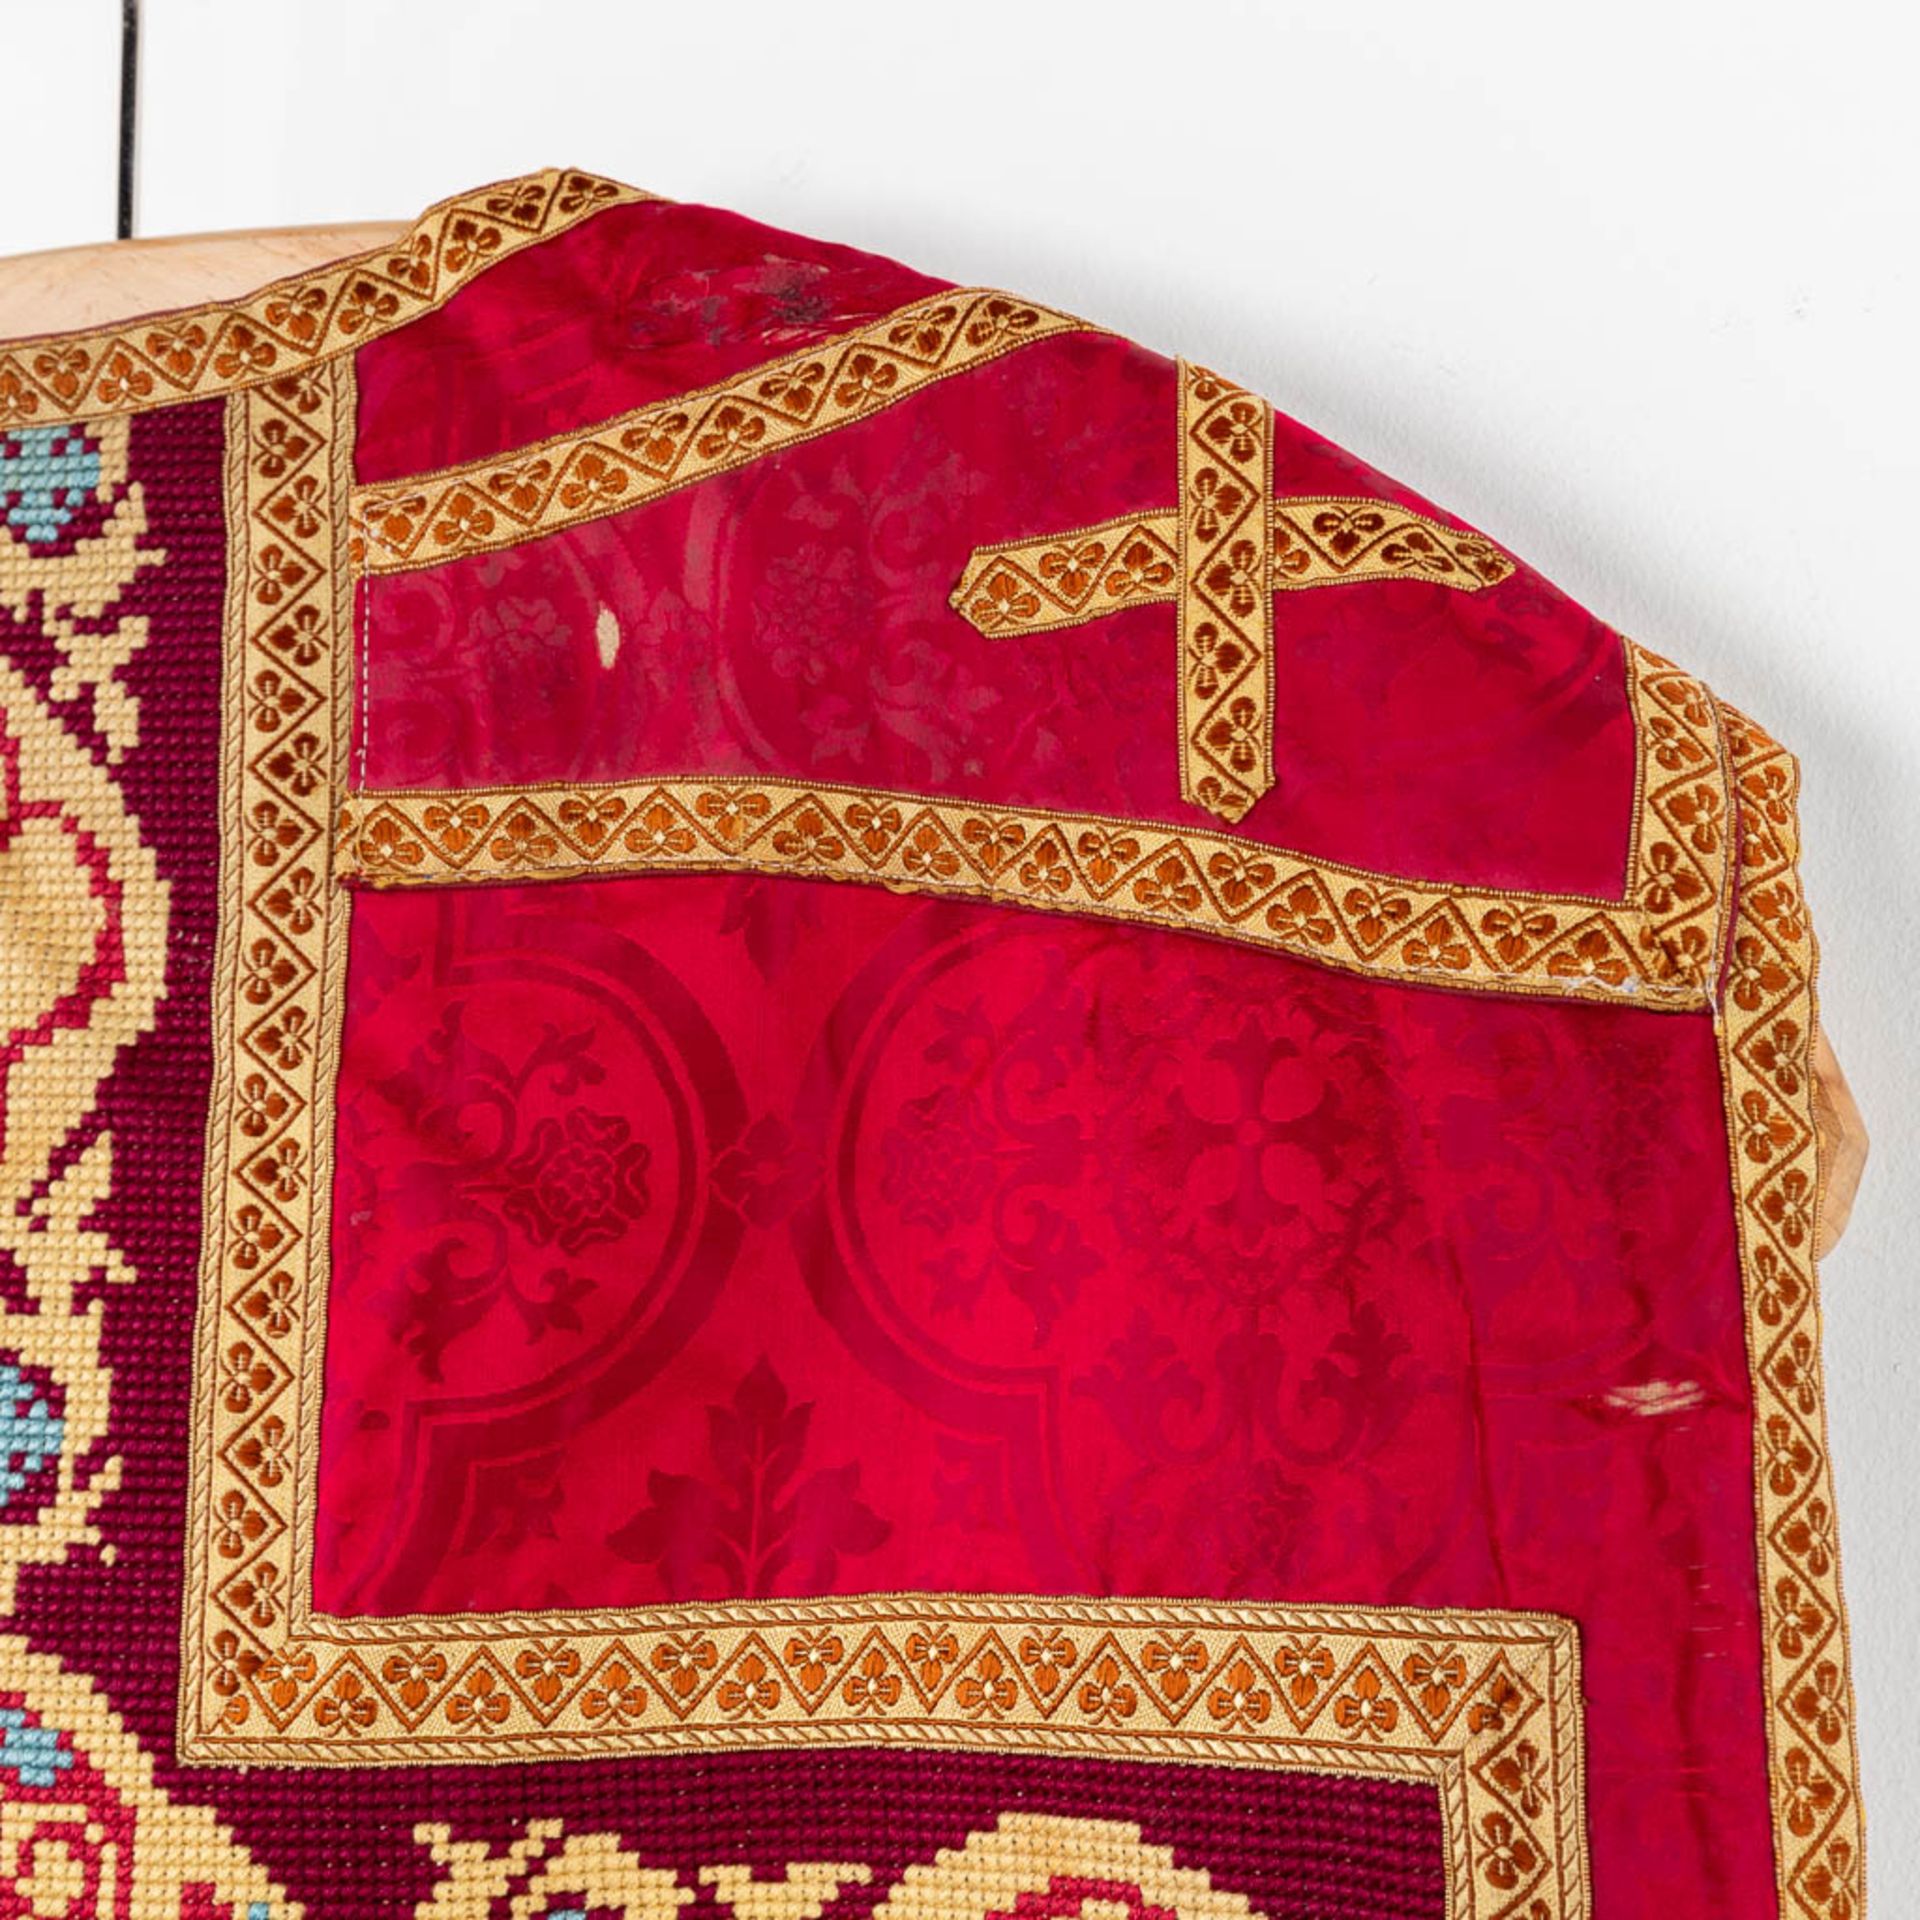 Four Dalmatics, Two Roman Chasubles, A stola and Chalice Veil, finished with embroideries. - Image 33 of 59